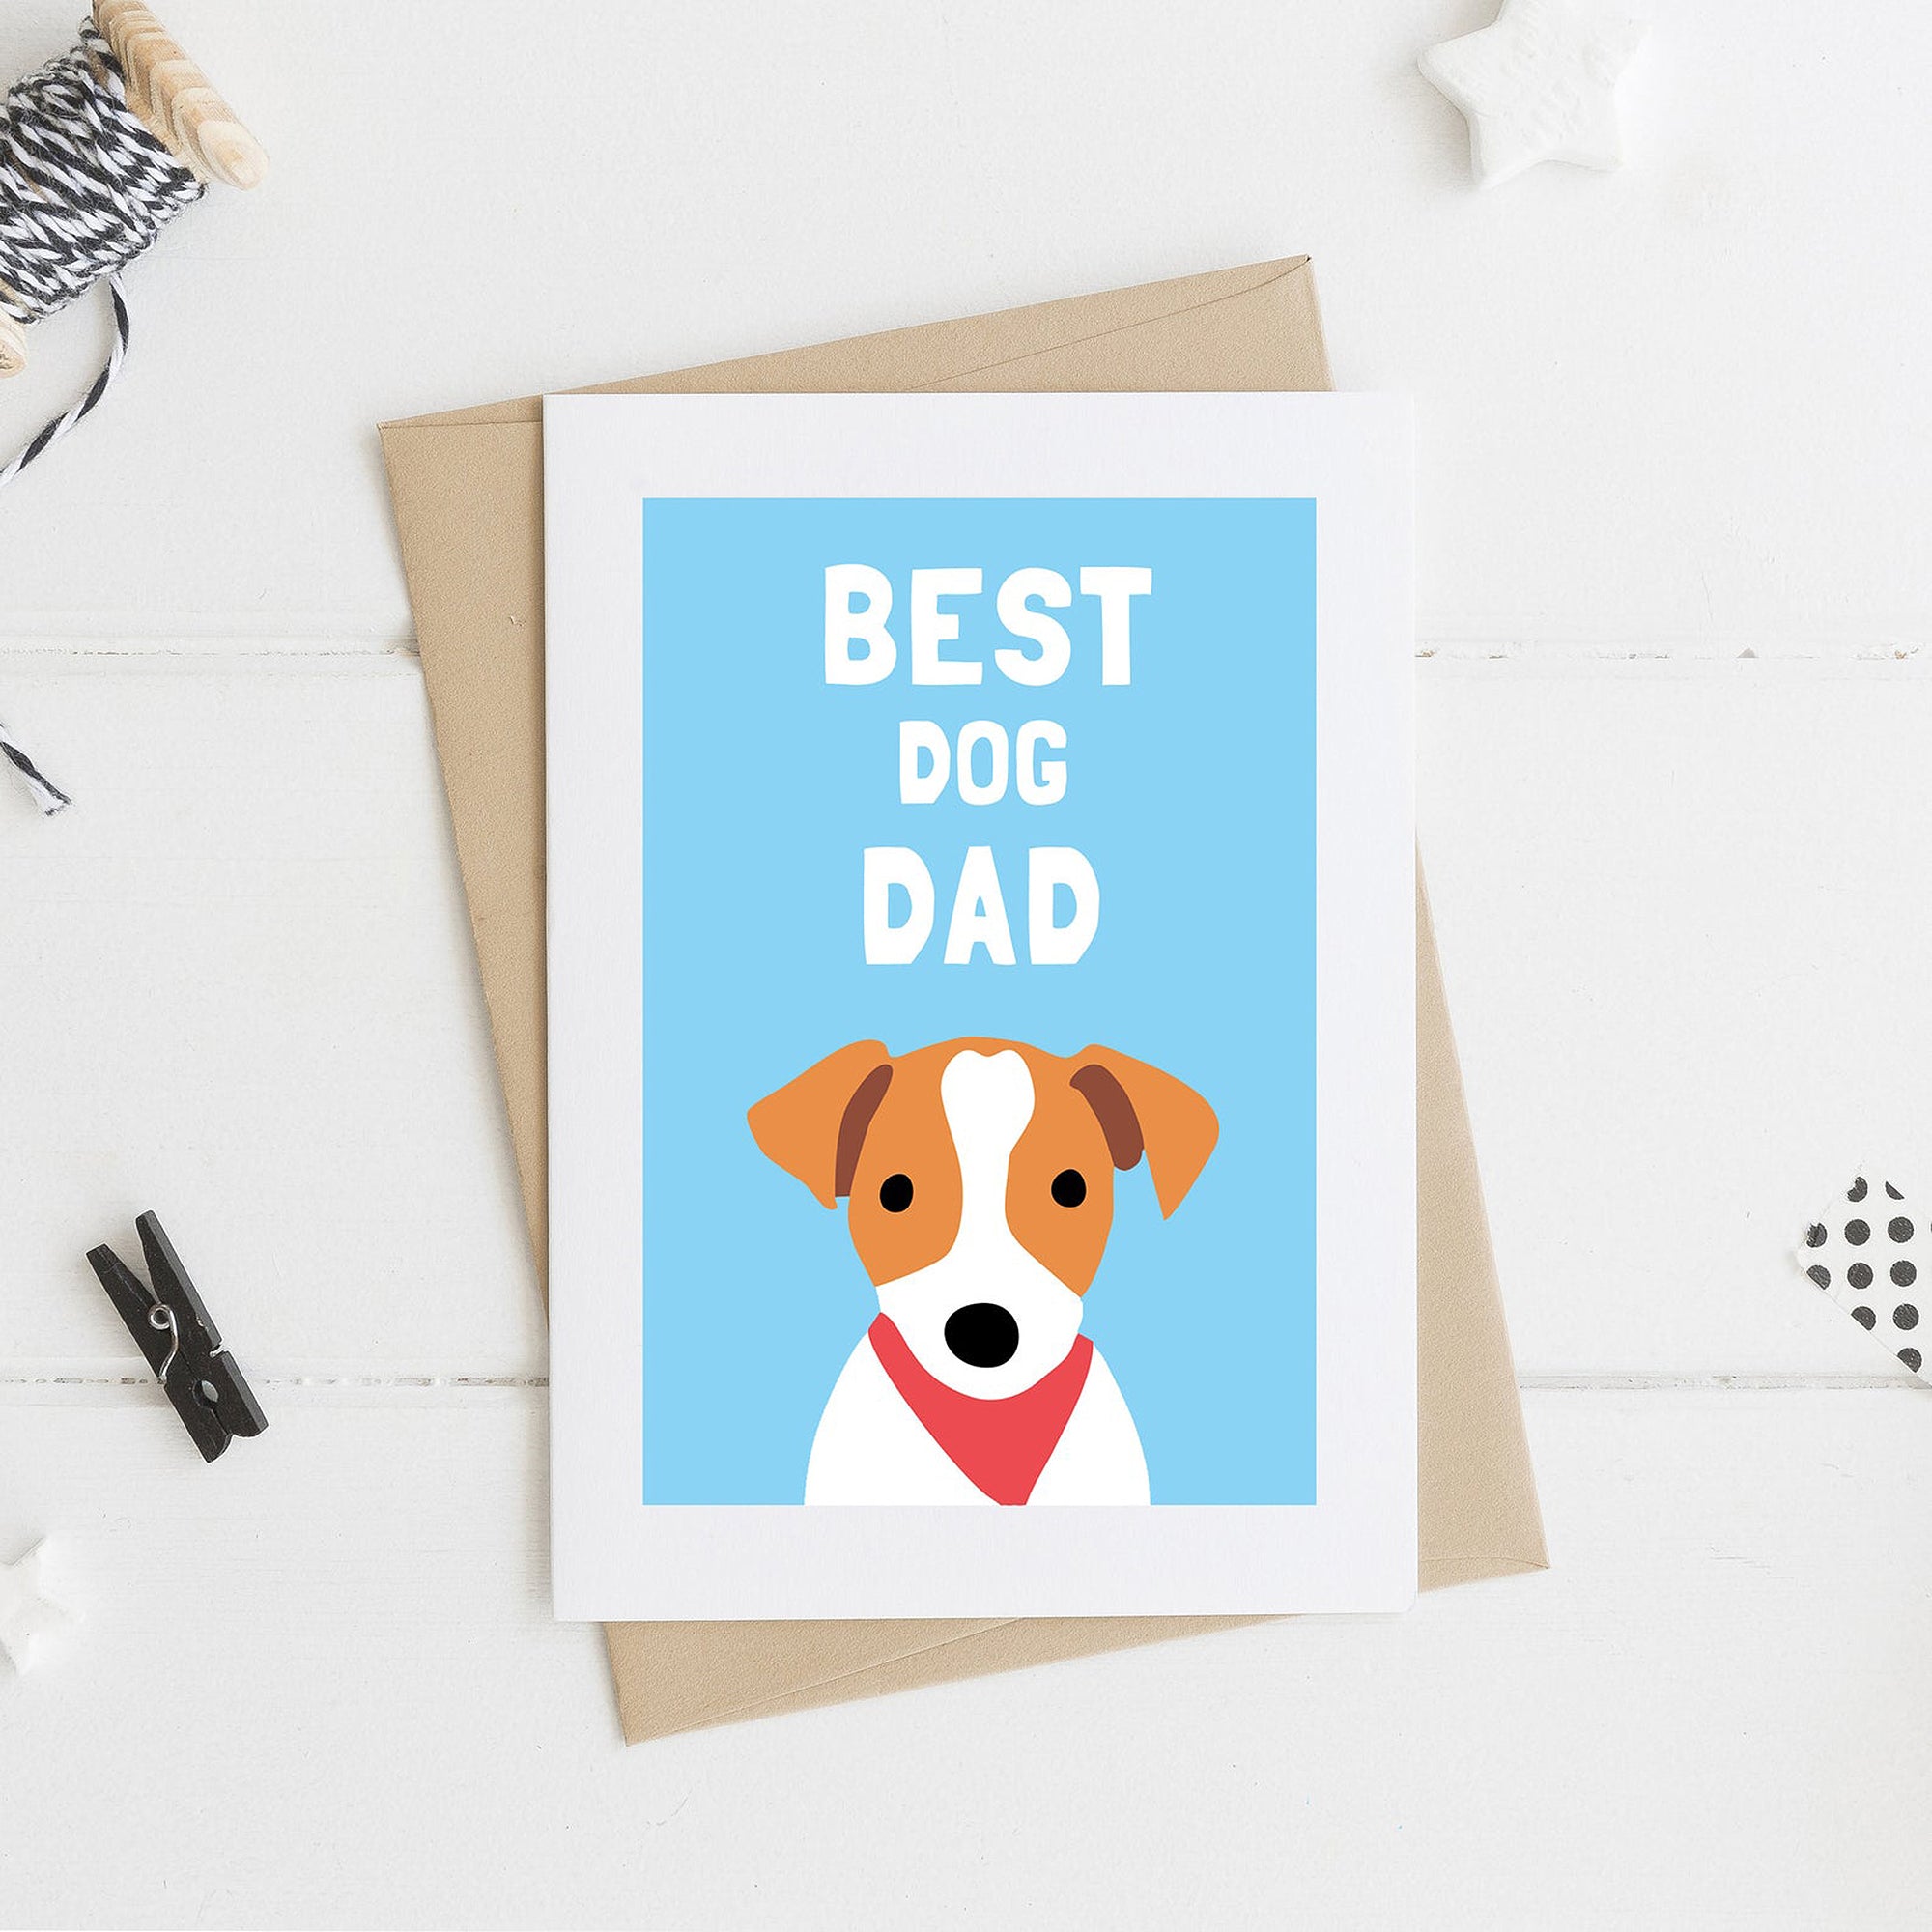 Best Dog Dad Jack Russell greetings card